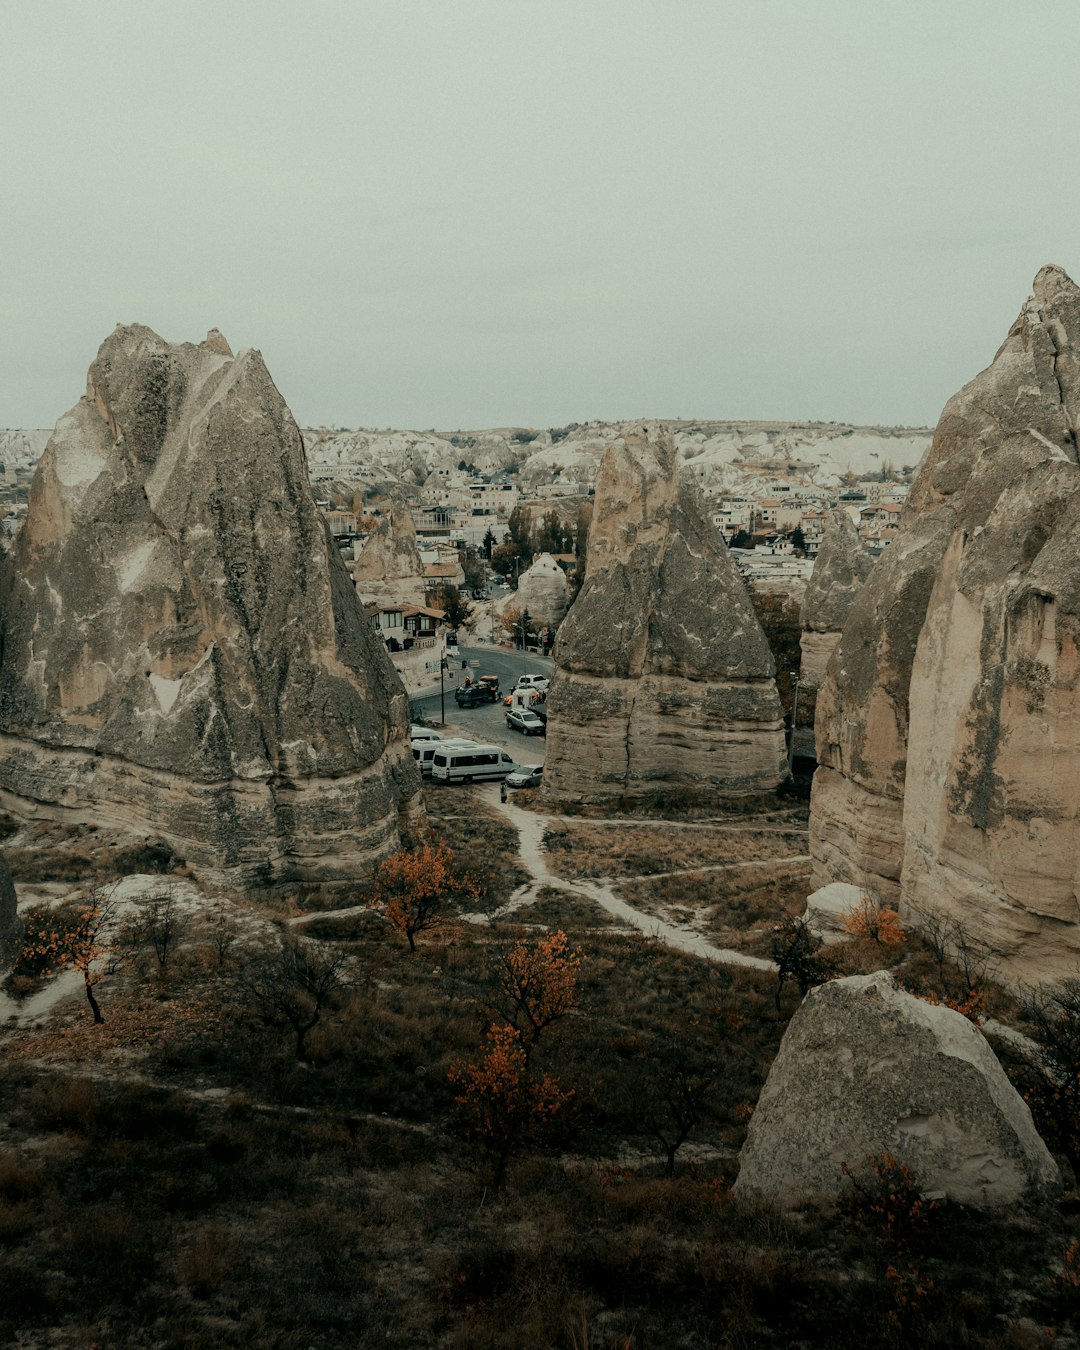 Travel Tips and Stories of Göreme in Turkey